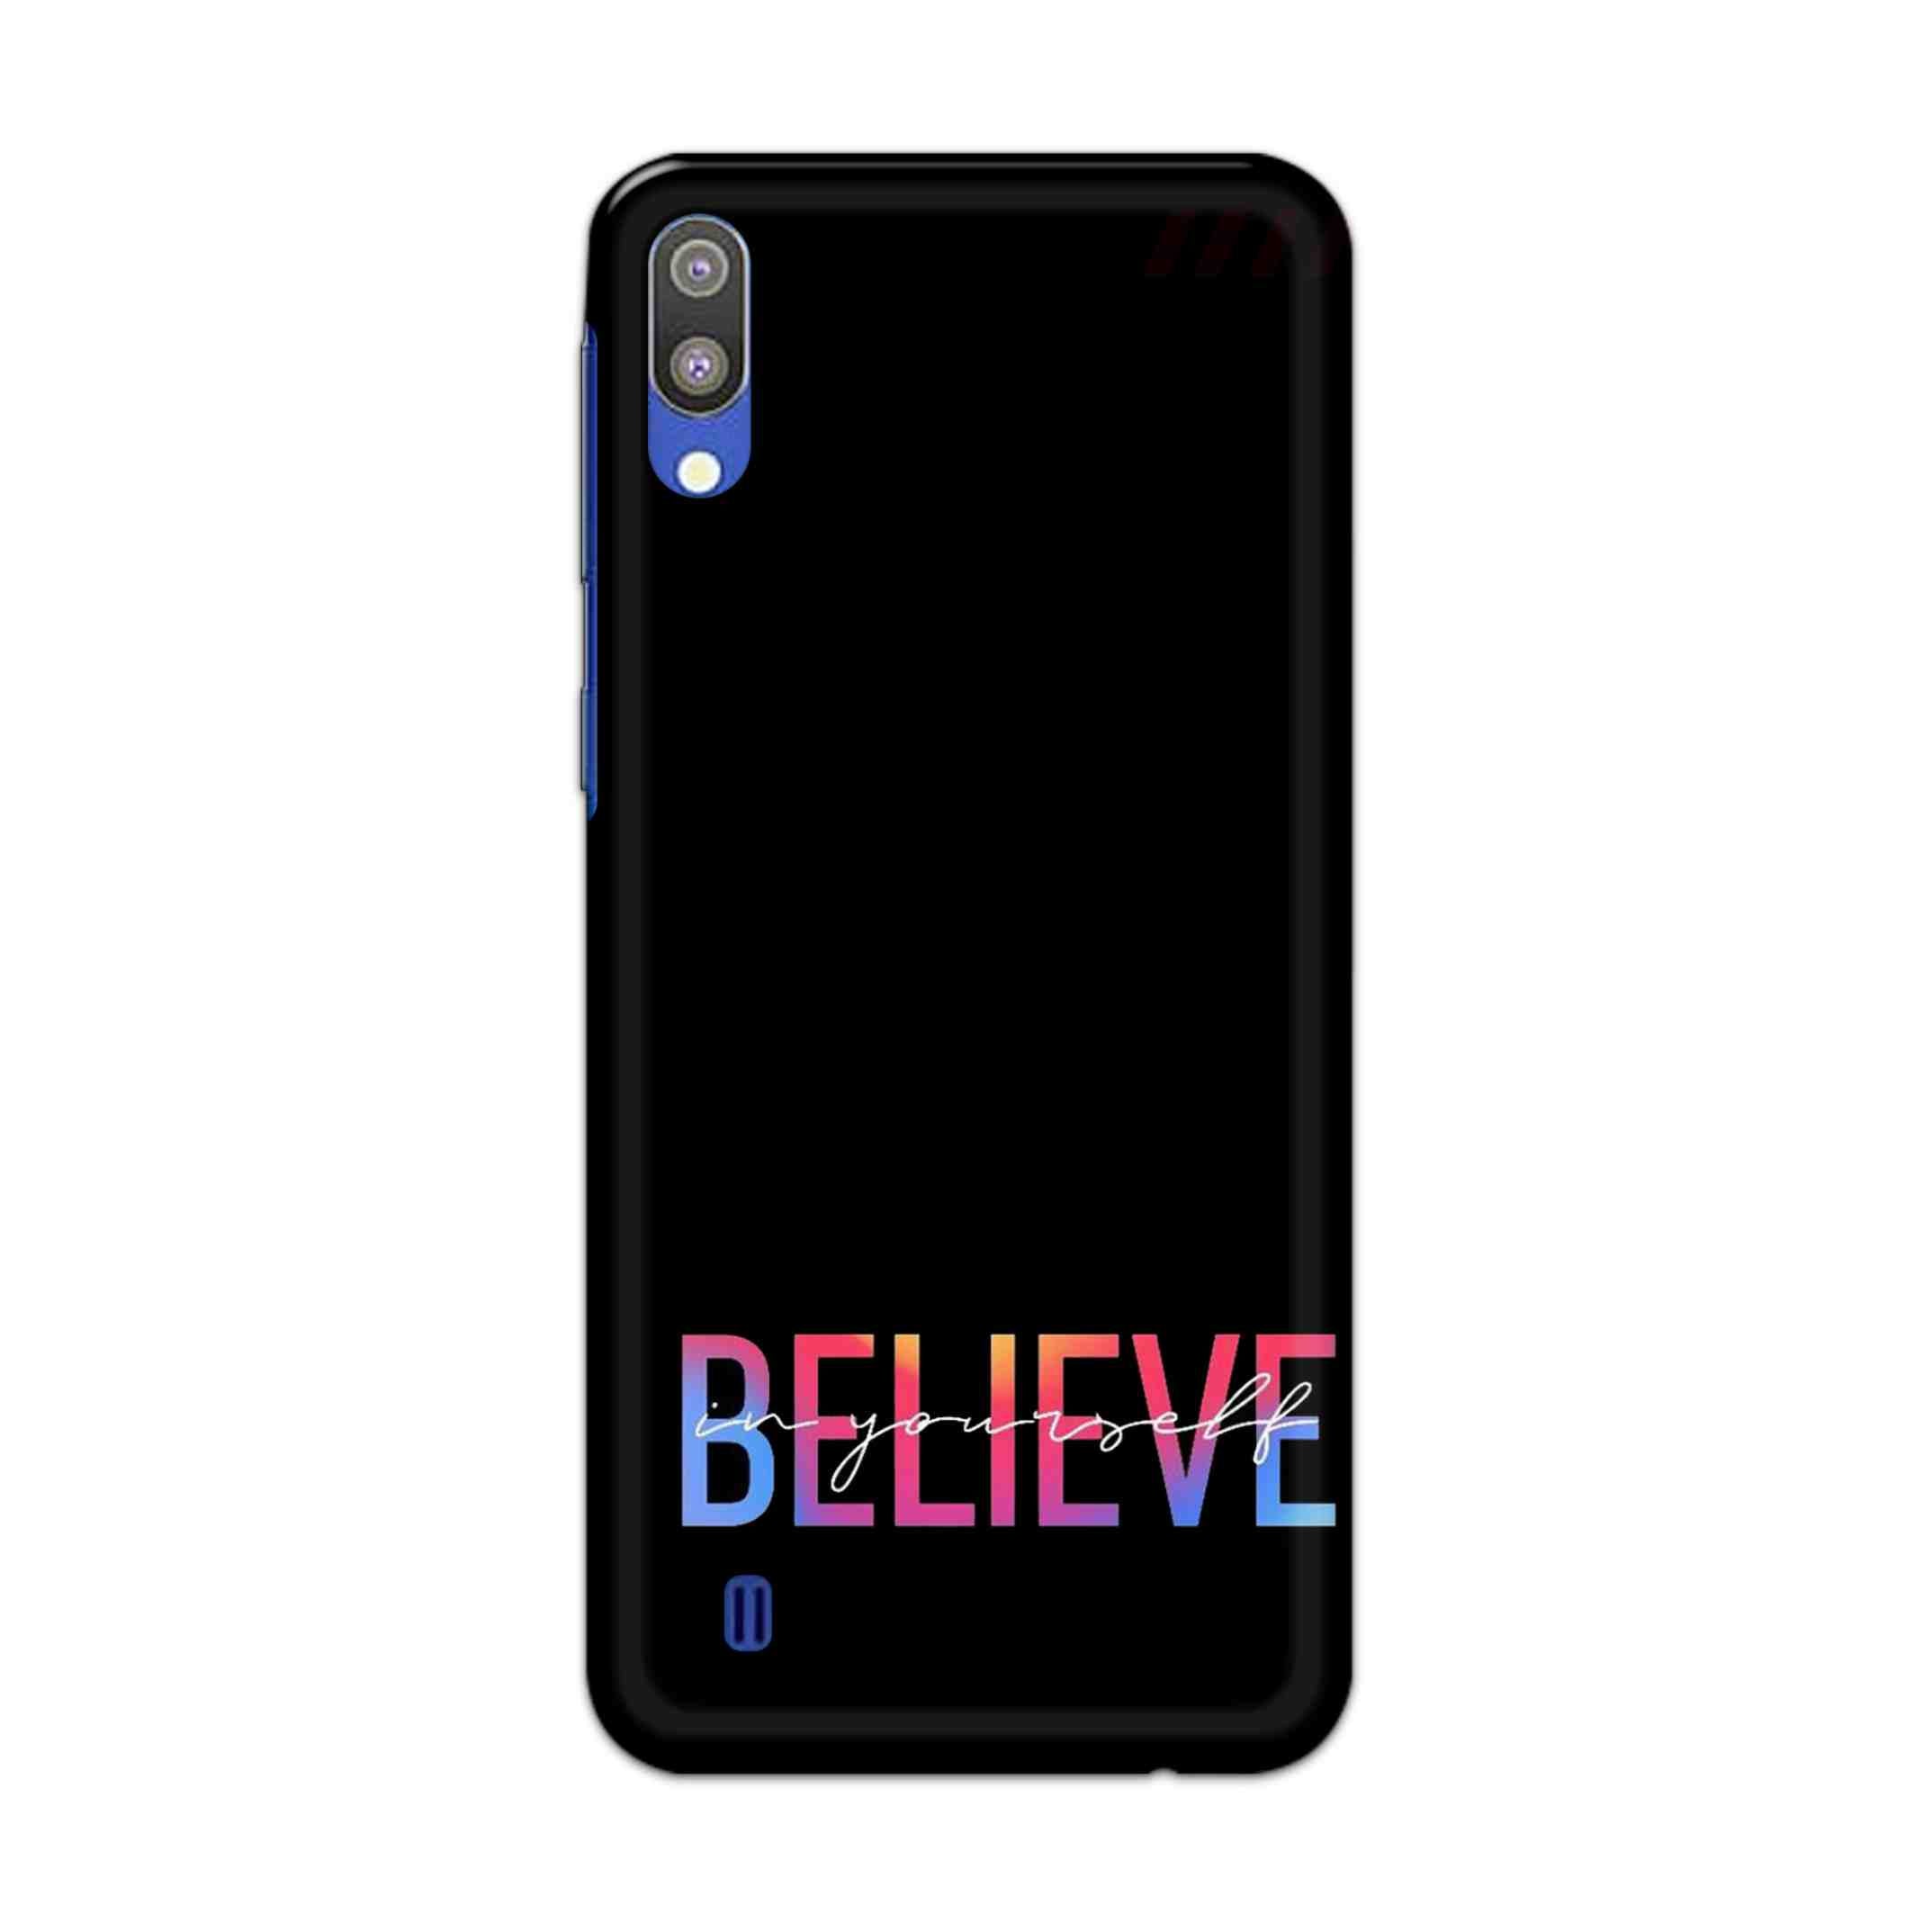 Buy Believe Hard Back Mobile Phone Case Cover For Samsung Galaxy M10 Online